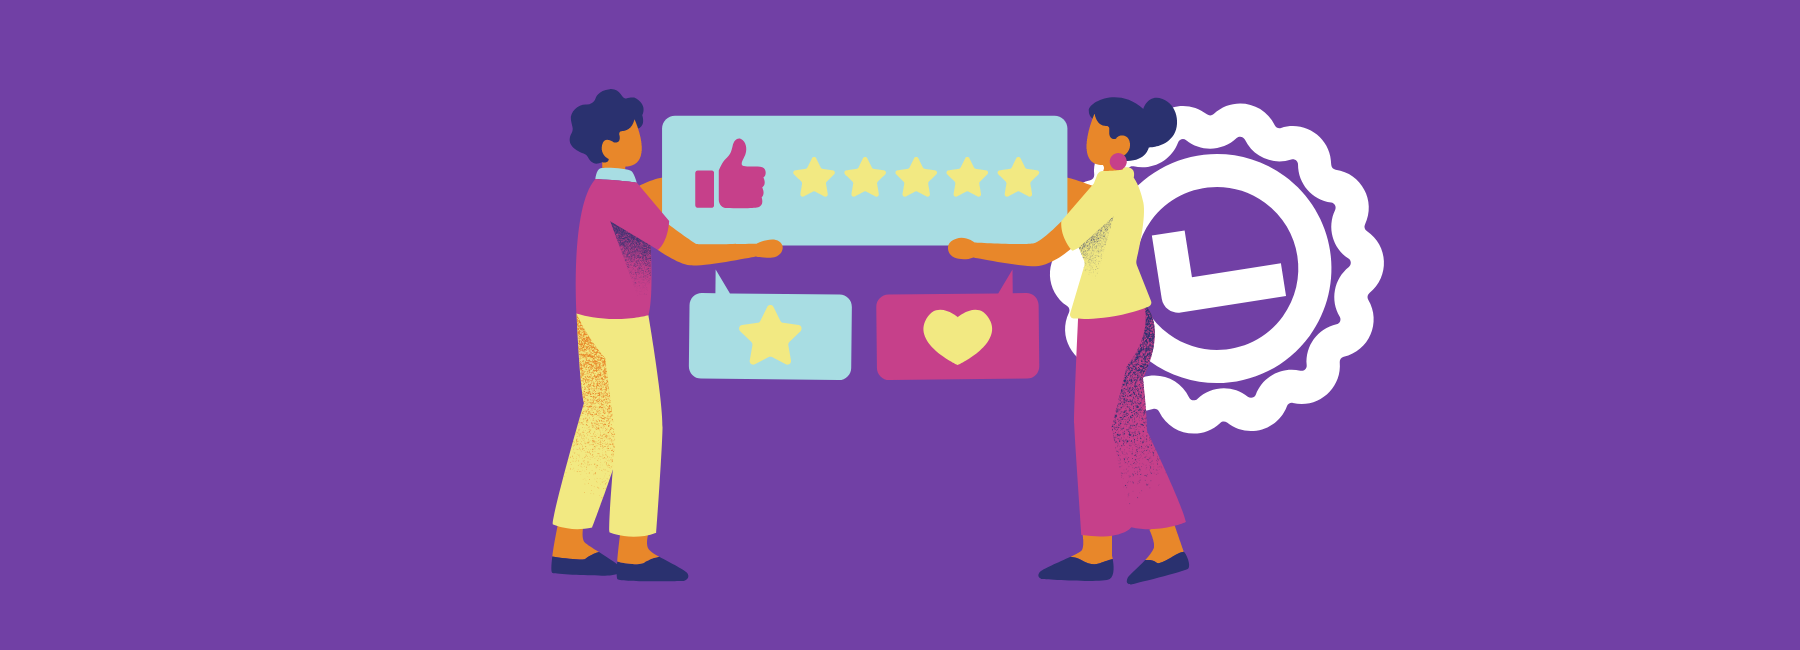 4 ways feedback improves the customer journey for government and nonprofit organisations